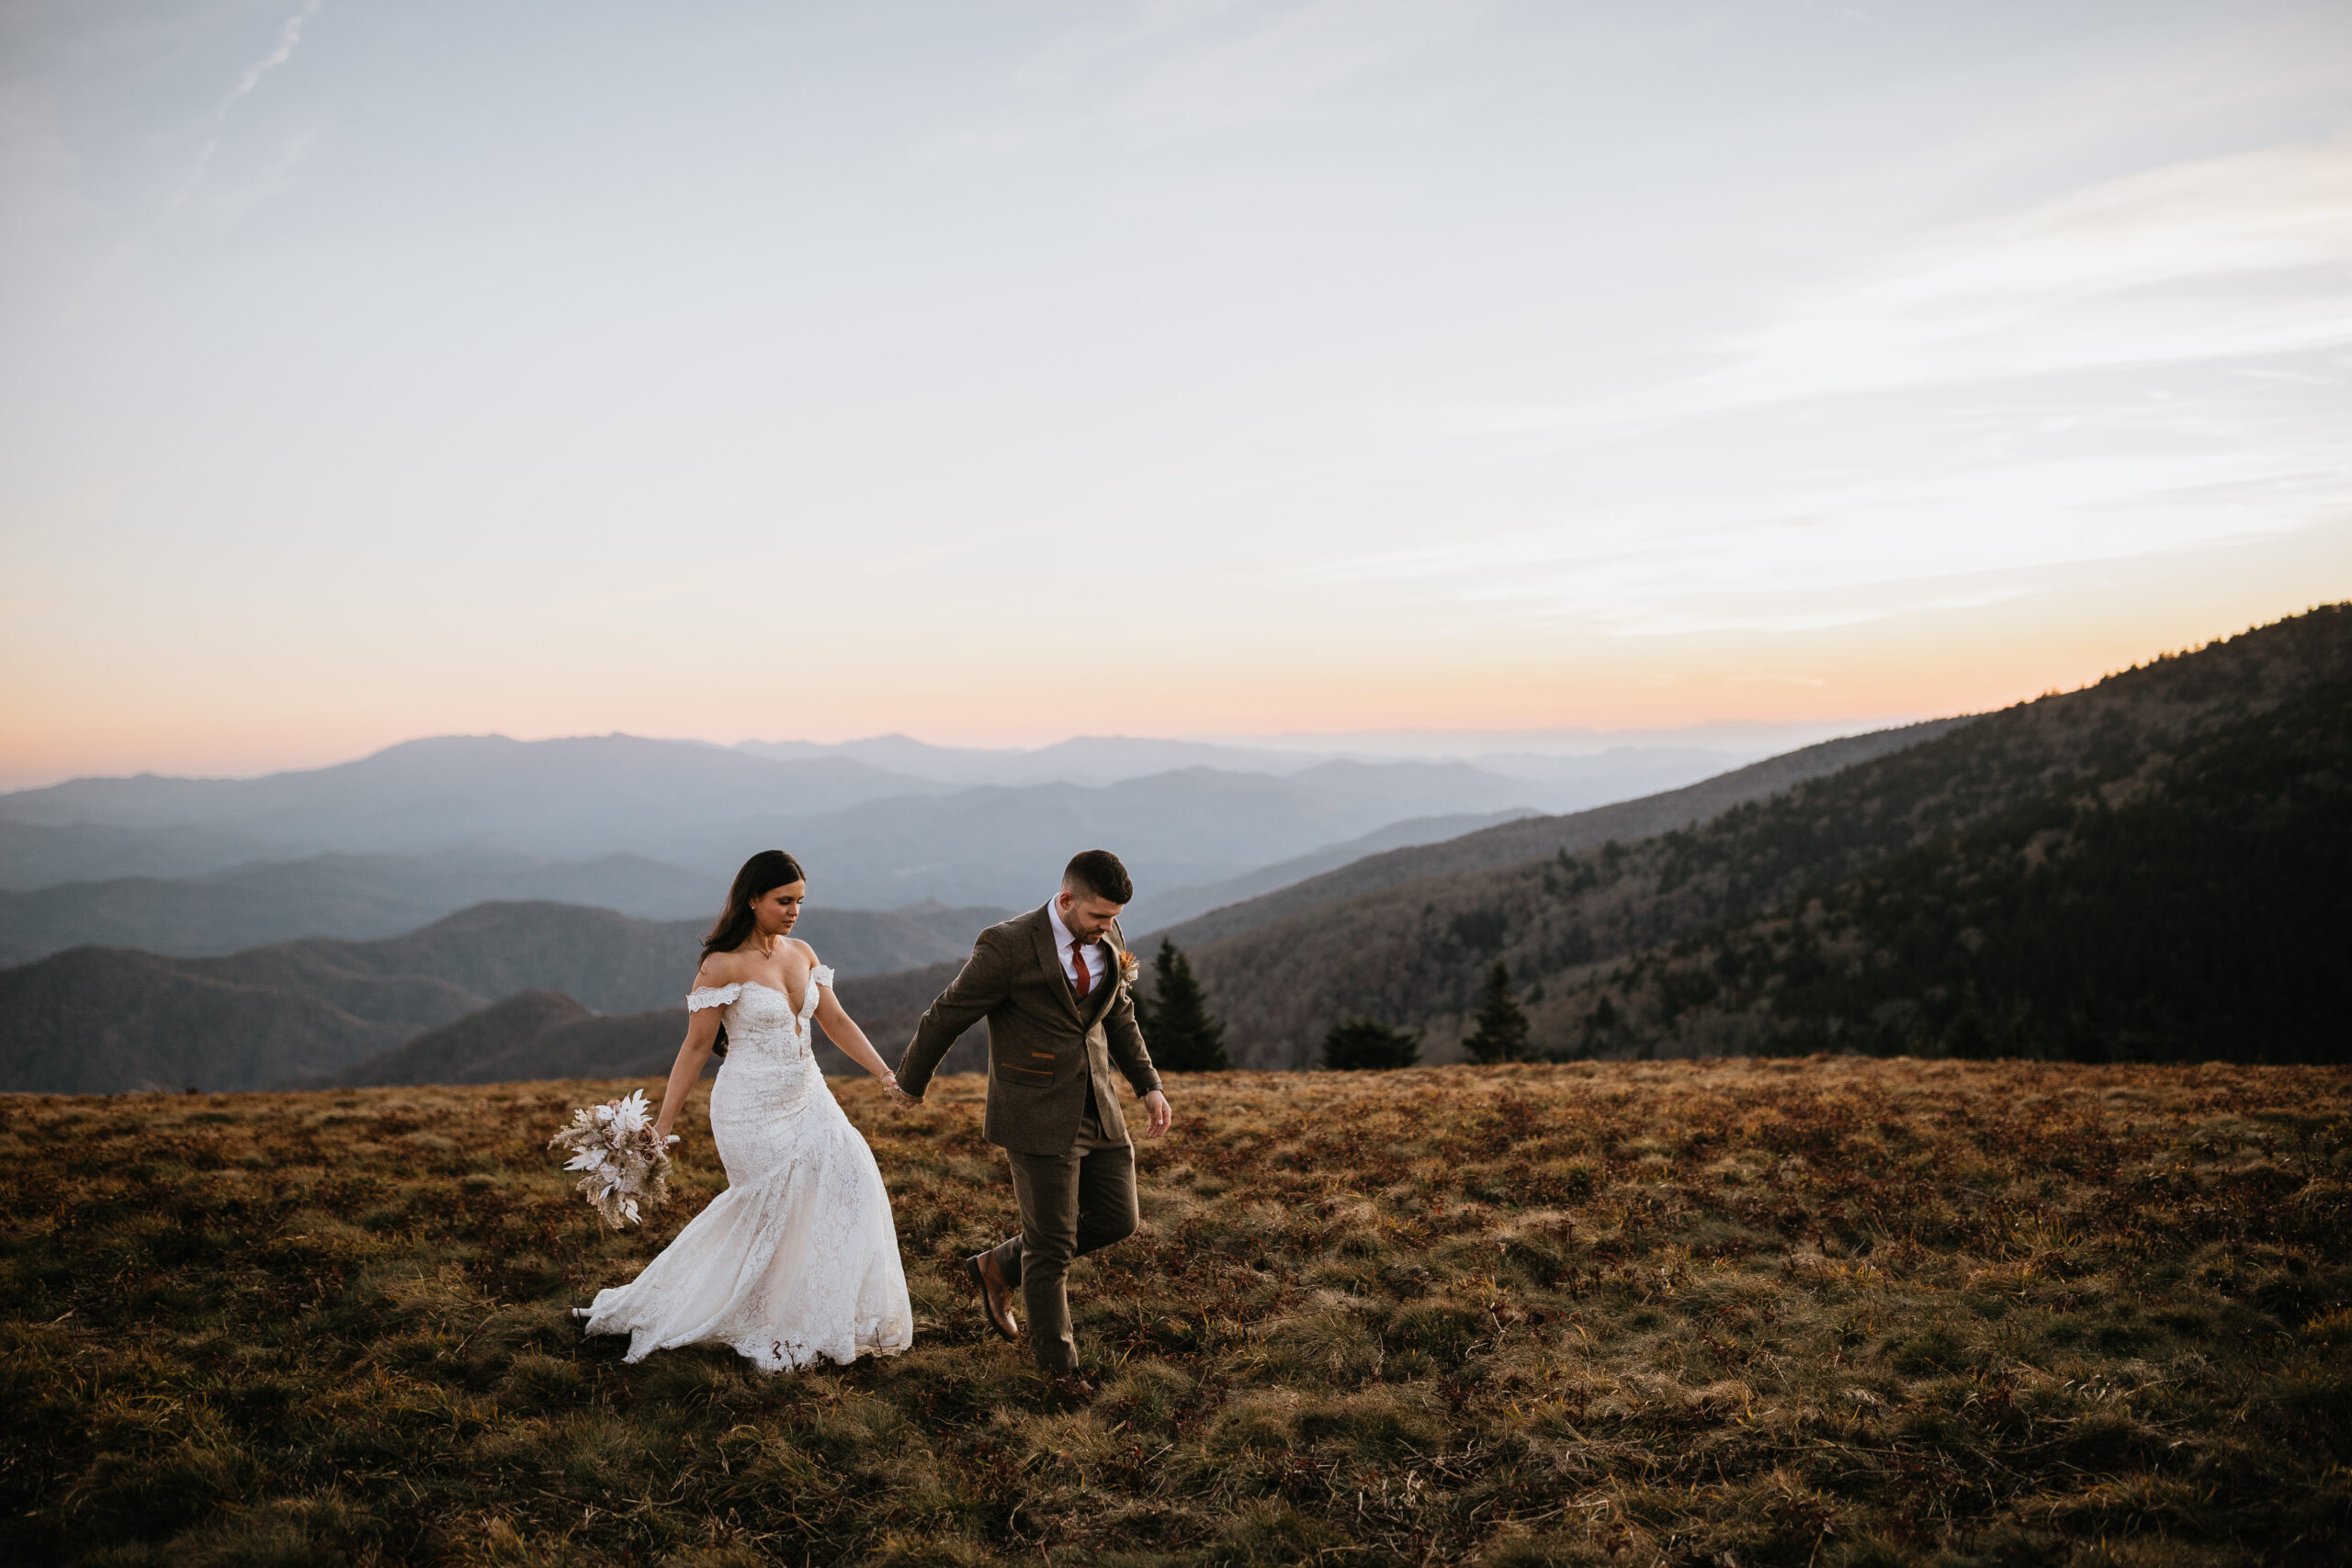 groom leading bride on top of mountain with beautiful mountain views in the background